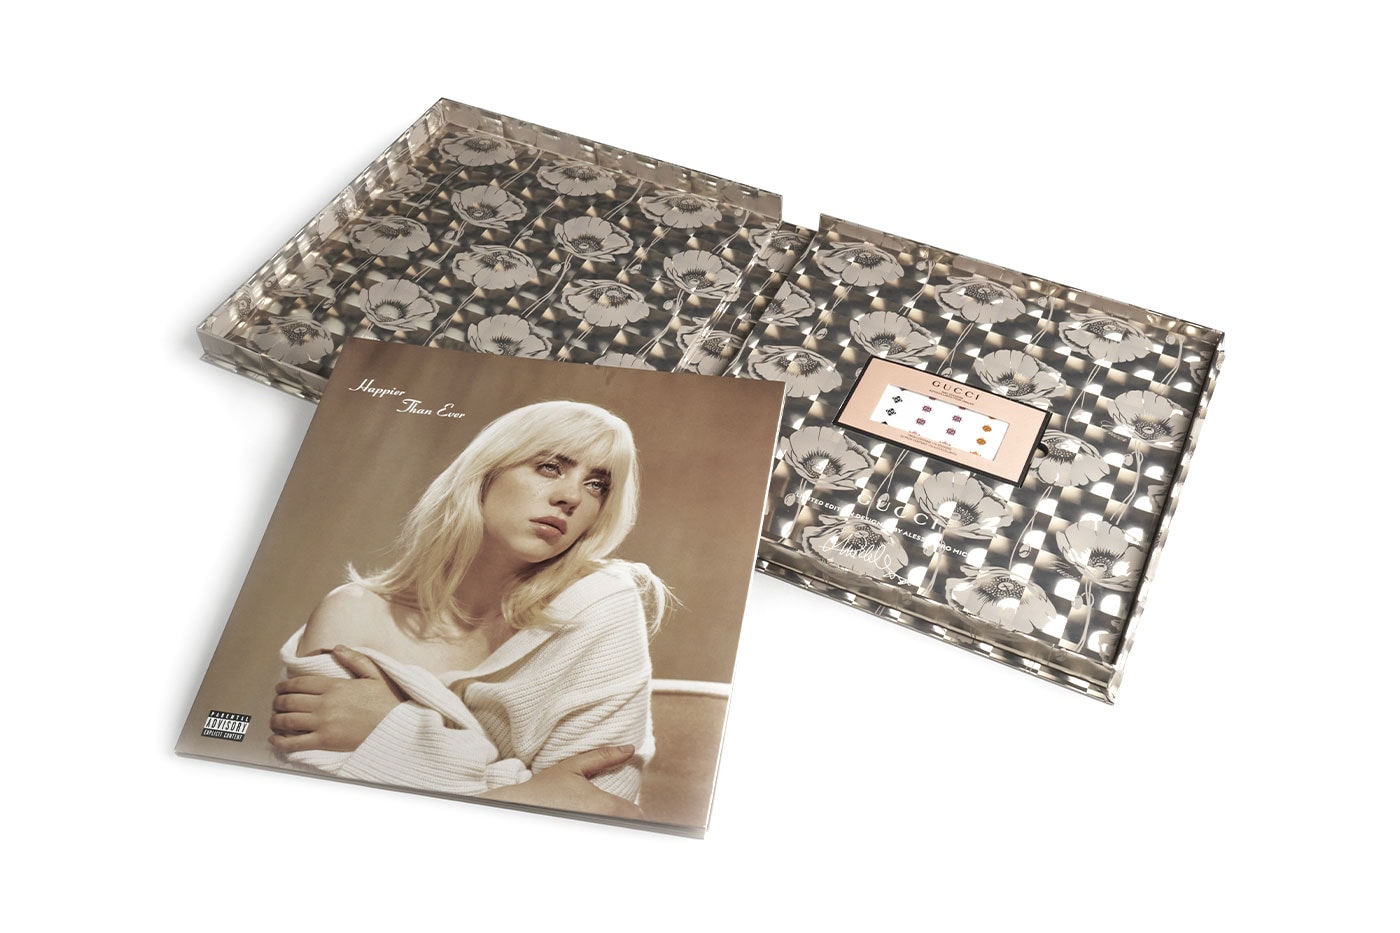 Gucci and Billie Eilish Release Limited-Edition 'Happier Than Ever' Vinyl Set alessandro michele italian luxury self-experssion los angeles artis pop nail stickers holiday christmas